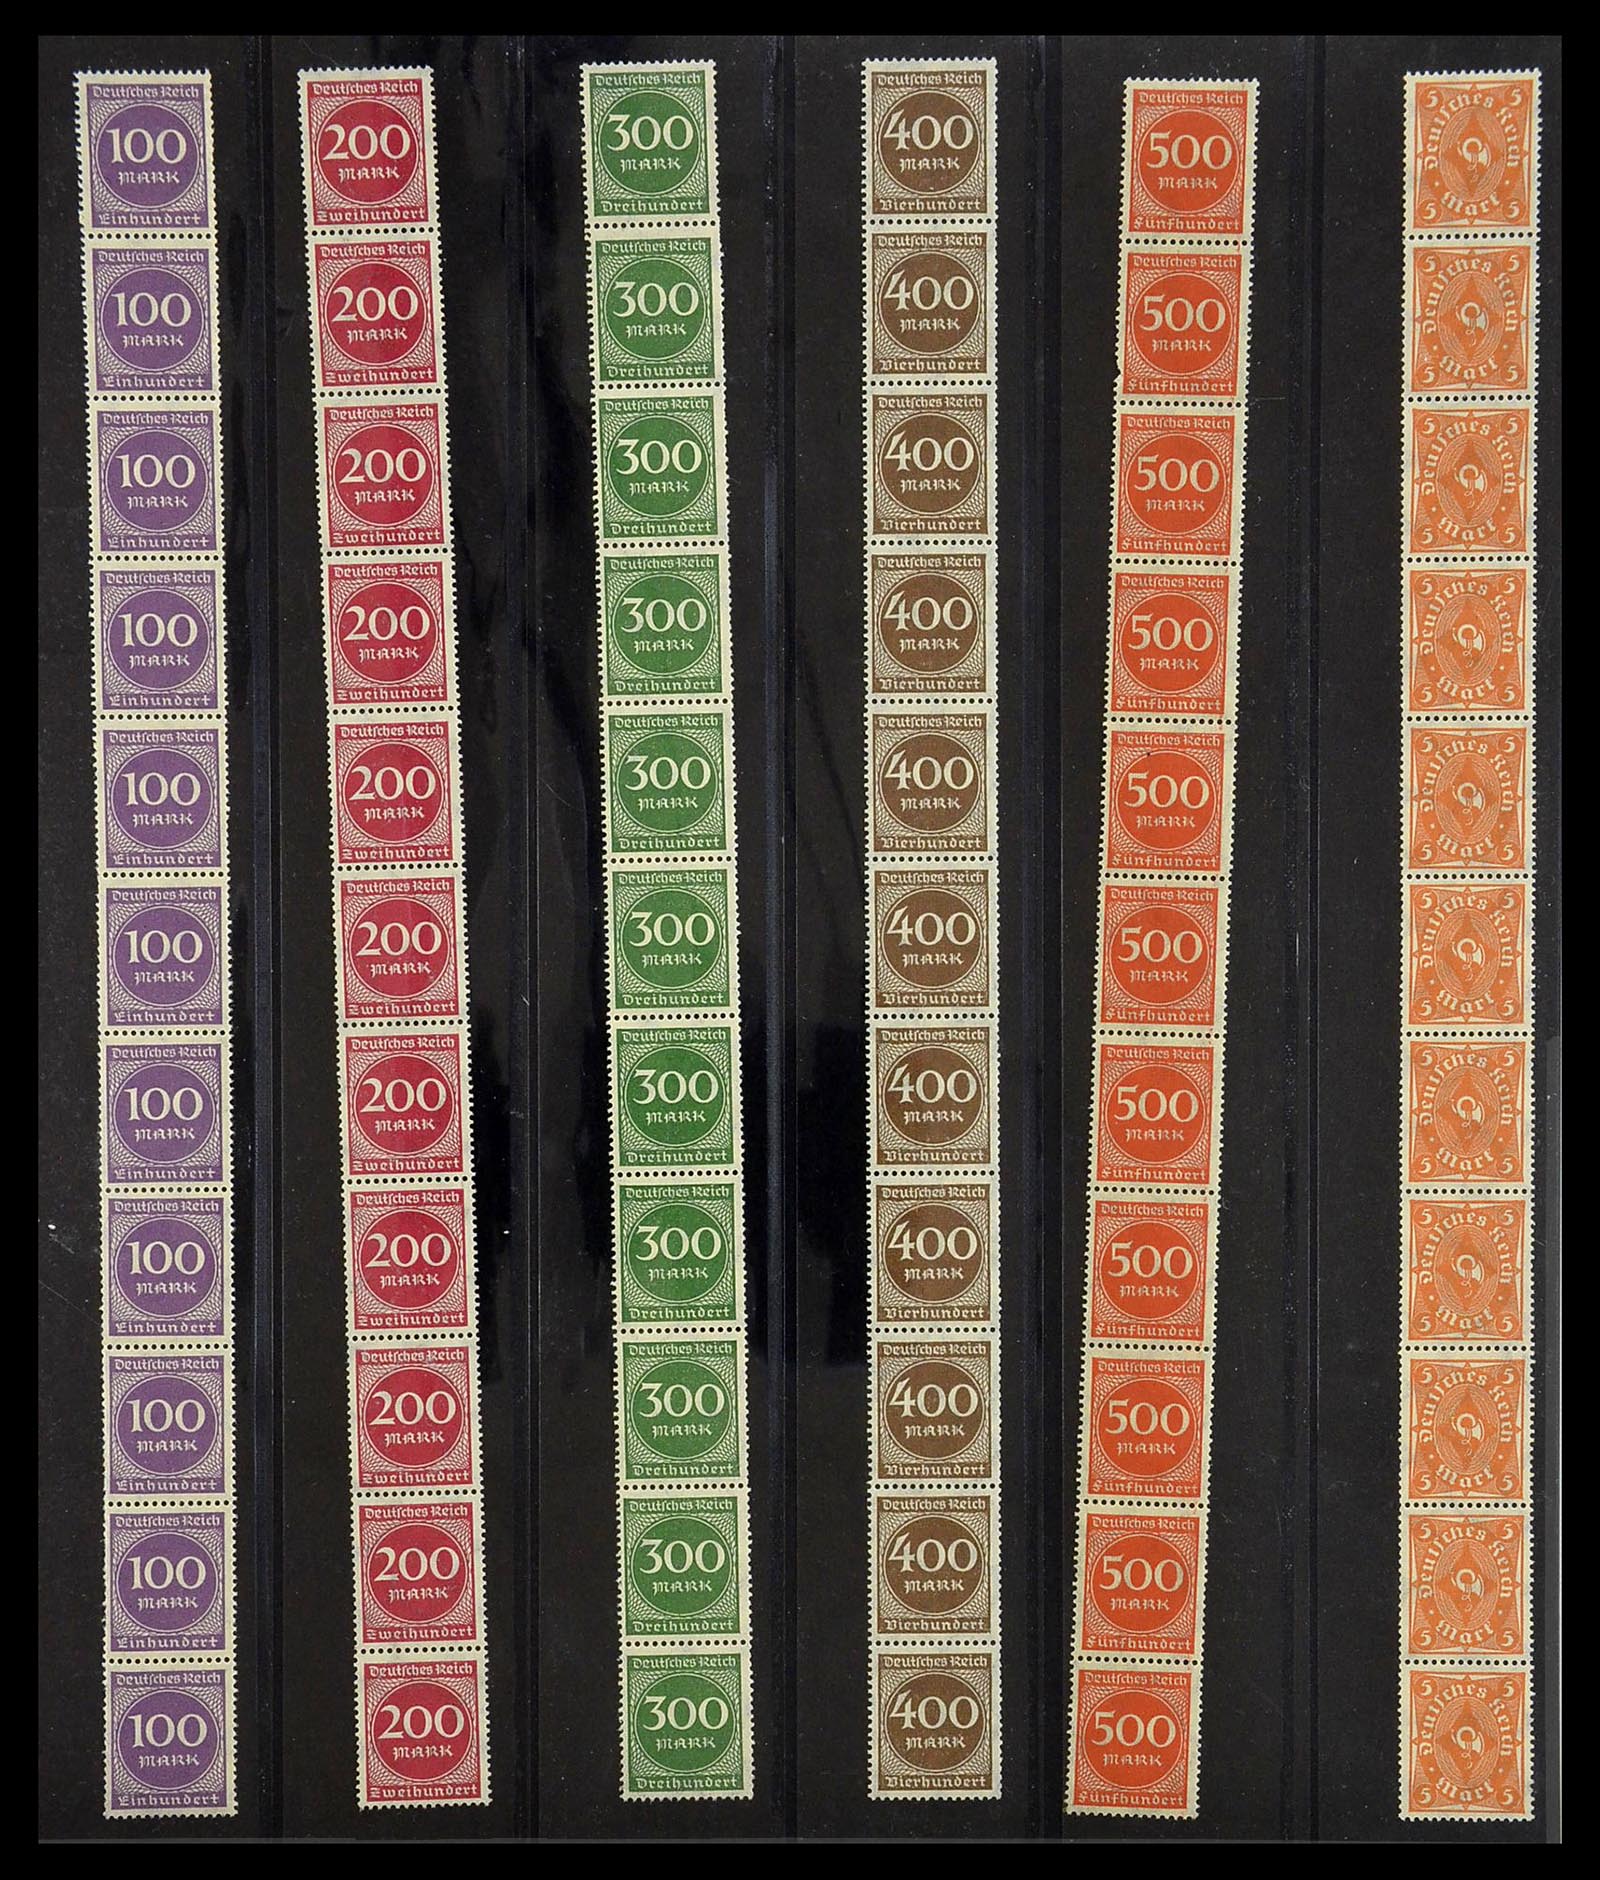 34461 004 - Stamp Collection 34461 Germany coil stamps 1910-2004.